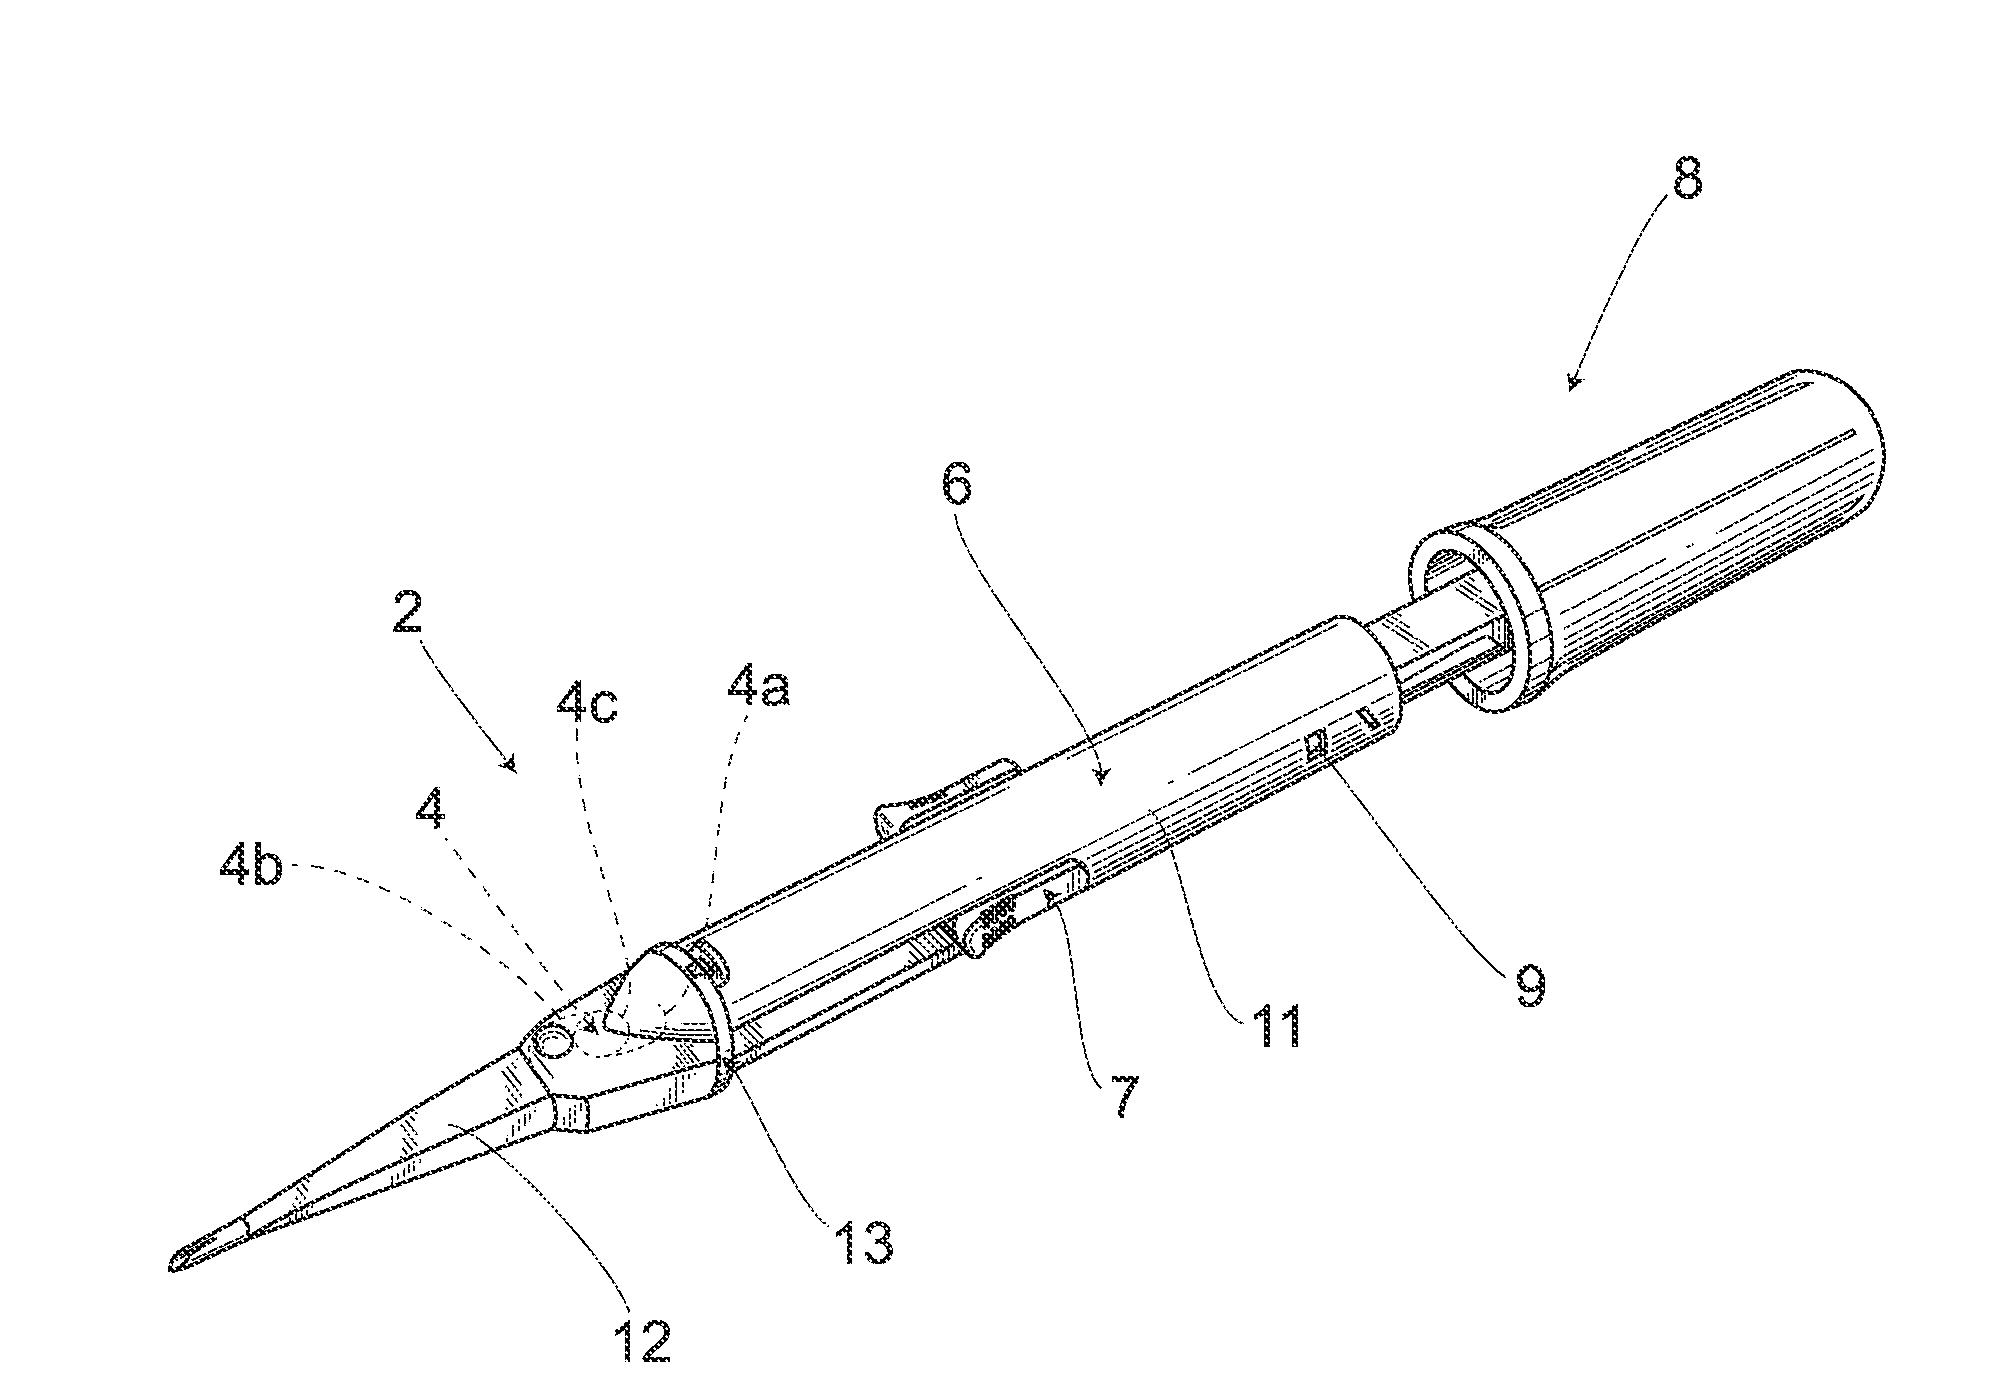 Intraocular Lens Insertion Device